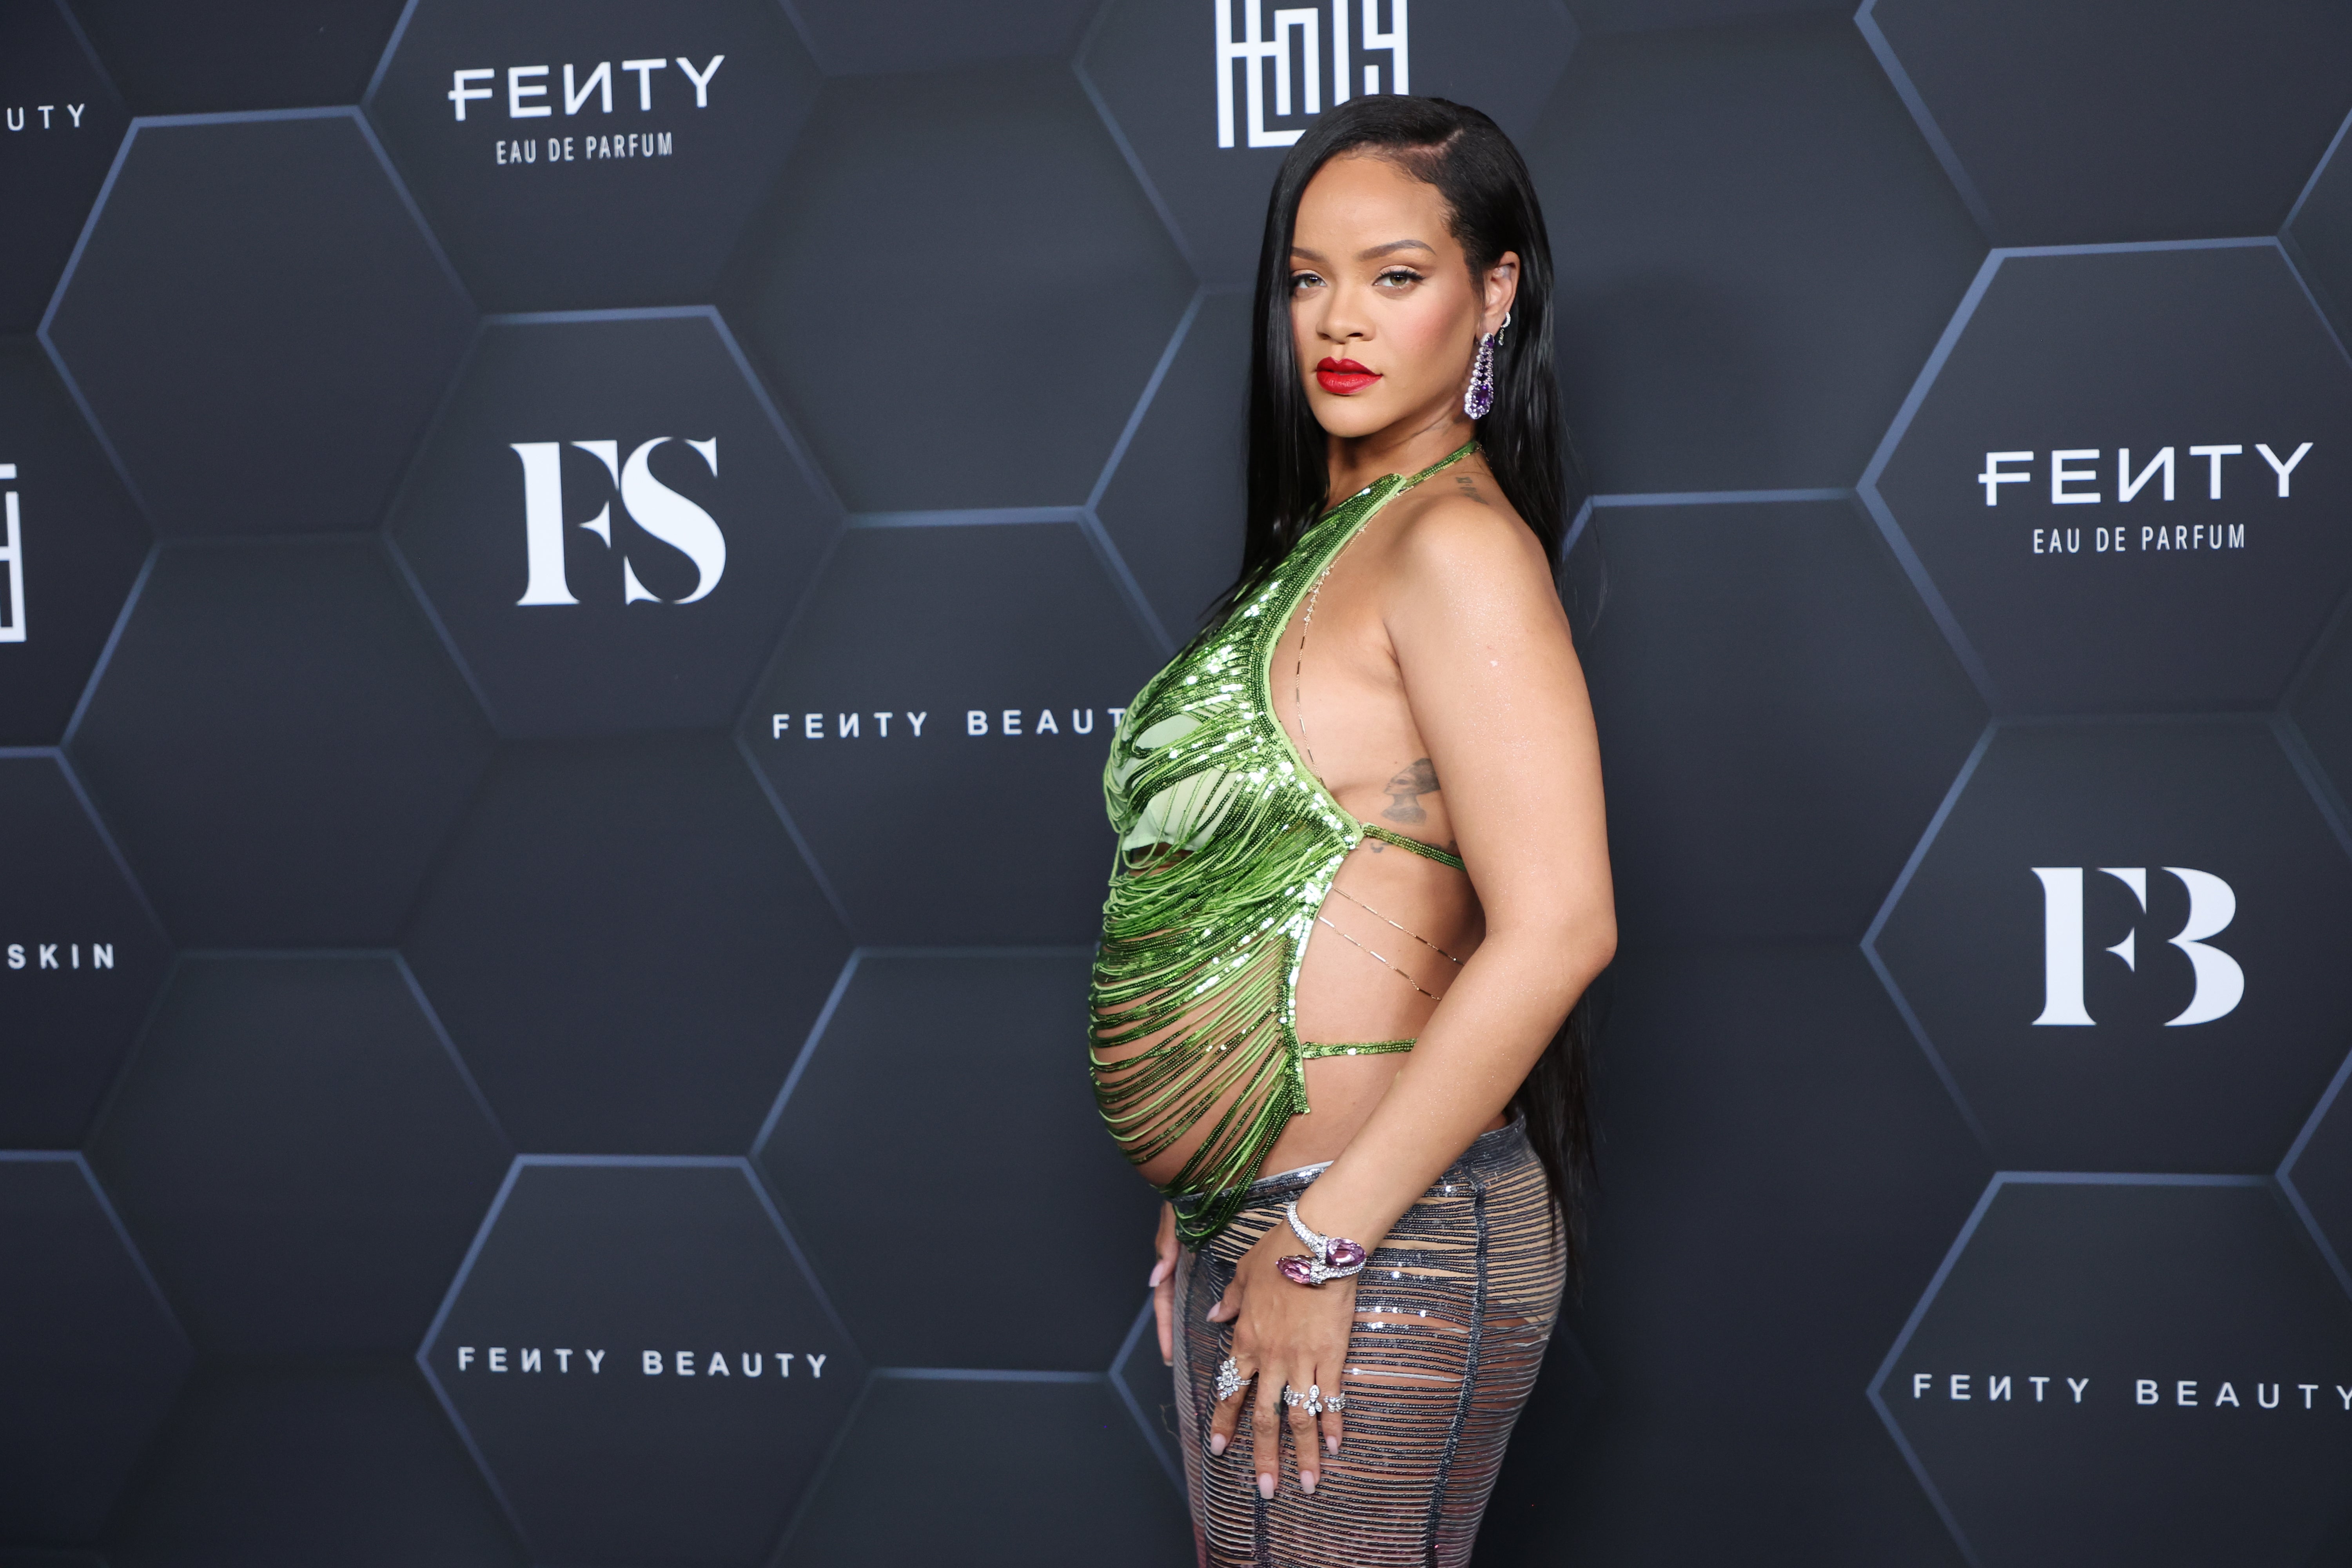 Rihanna's sexy maternity looks receive praise – so why are fat